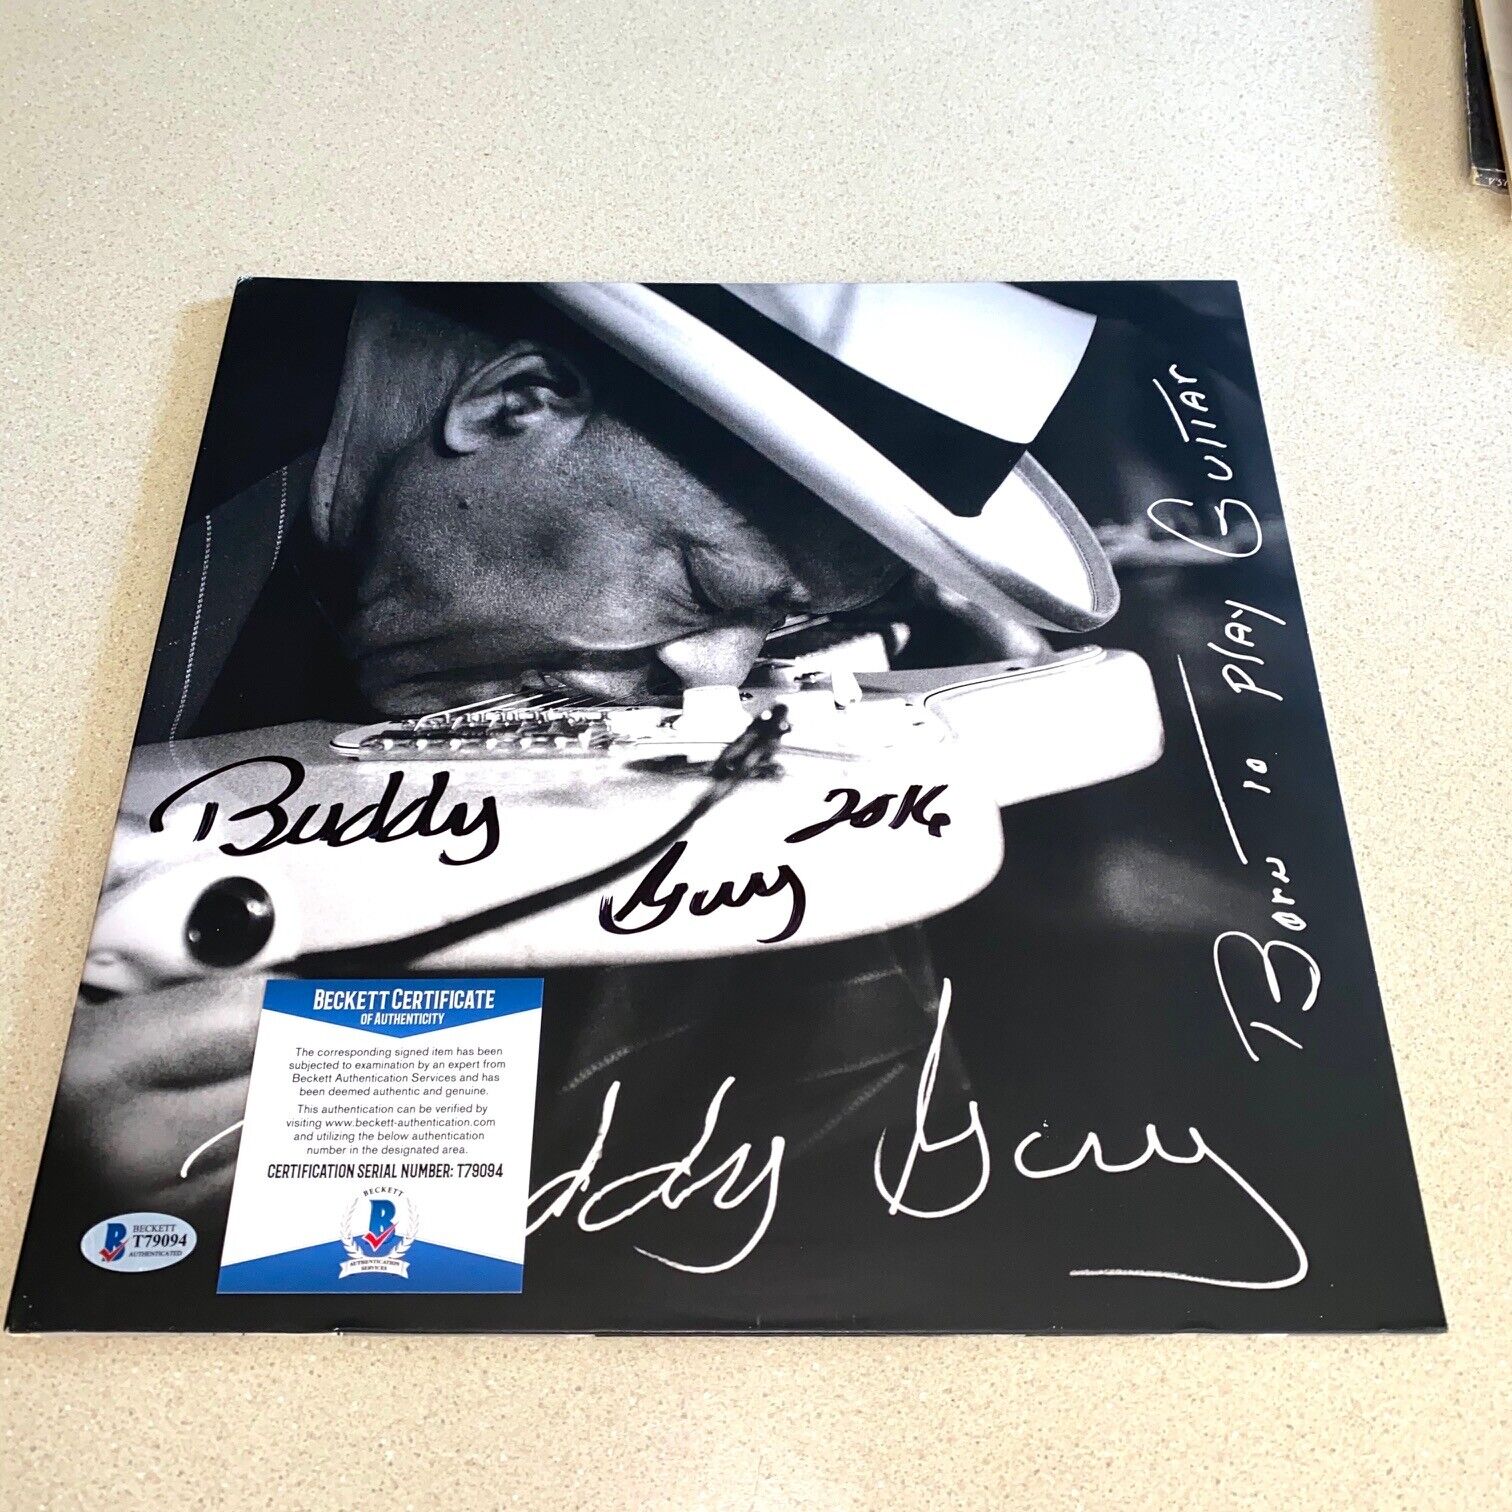 BUDDY GUY signed autographed BORN TO PLAY GUITAR ALBUM BLUES BEC